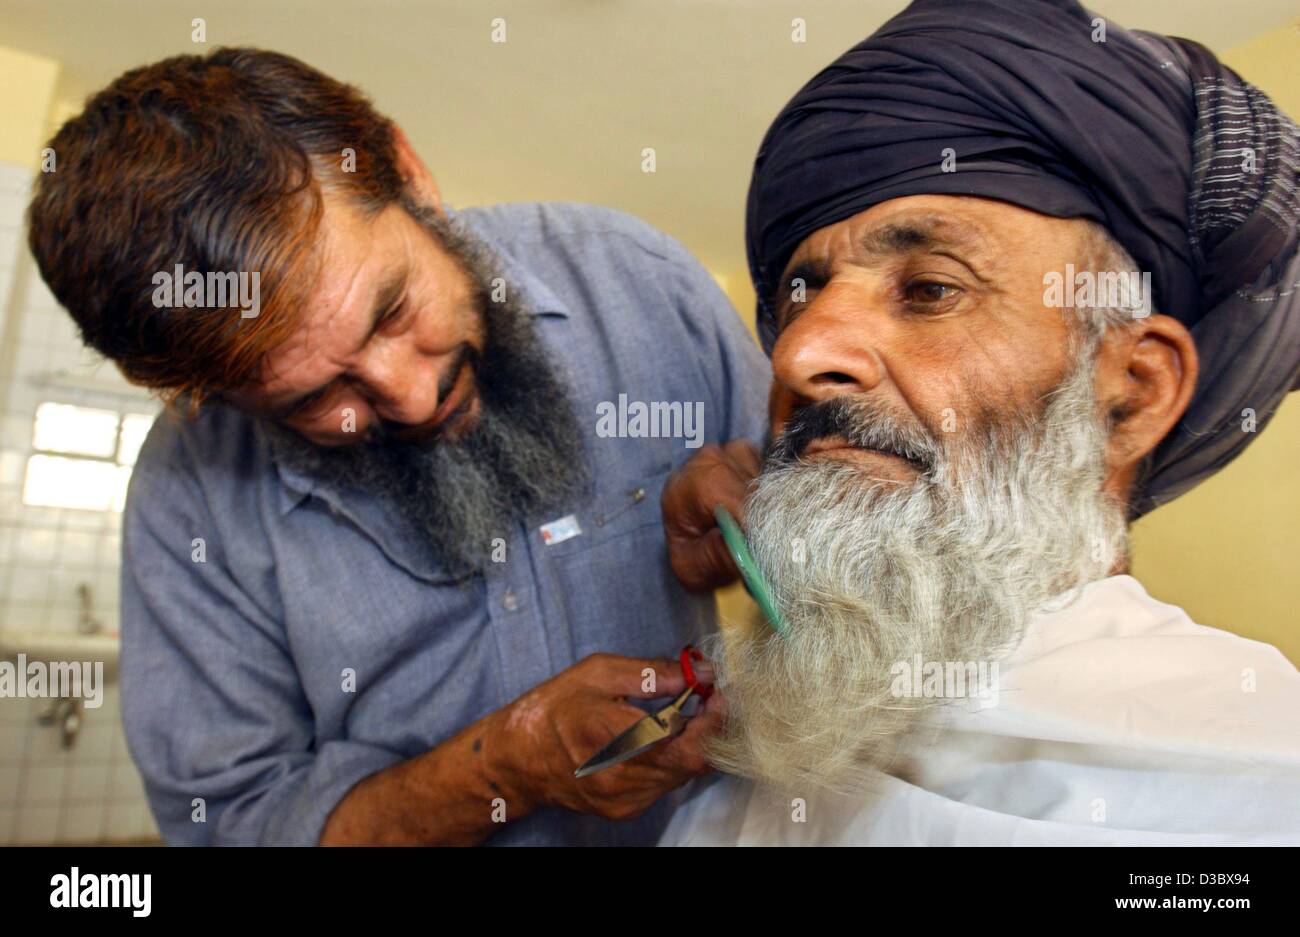 (dpa) - An Afghan man has his beard trimmed in a barber shop in Kabul, Afghanistan, 4 August 2003. Stock Photo